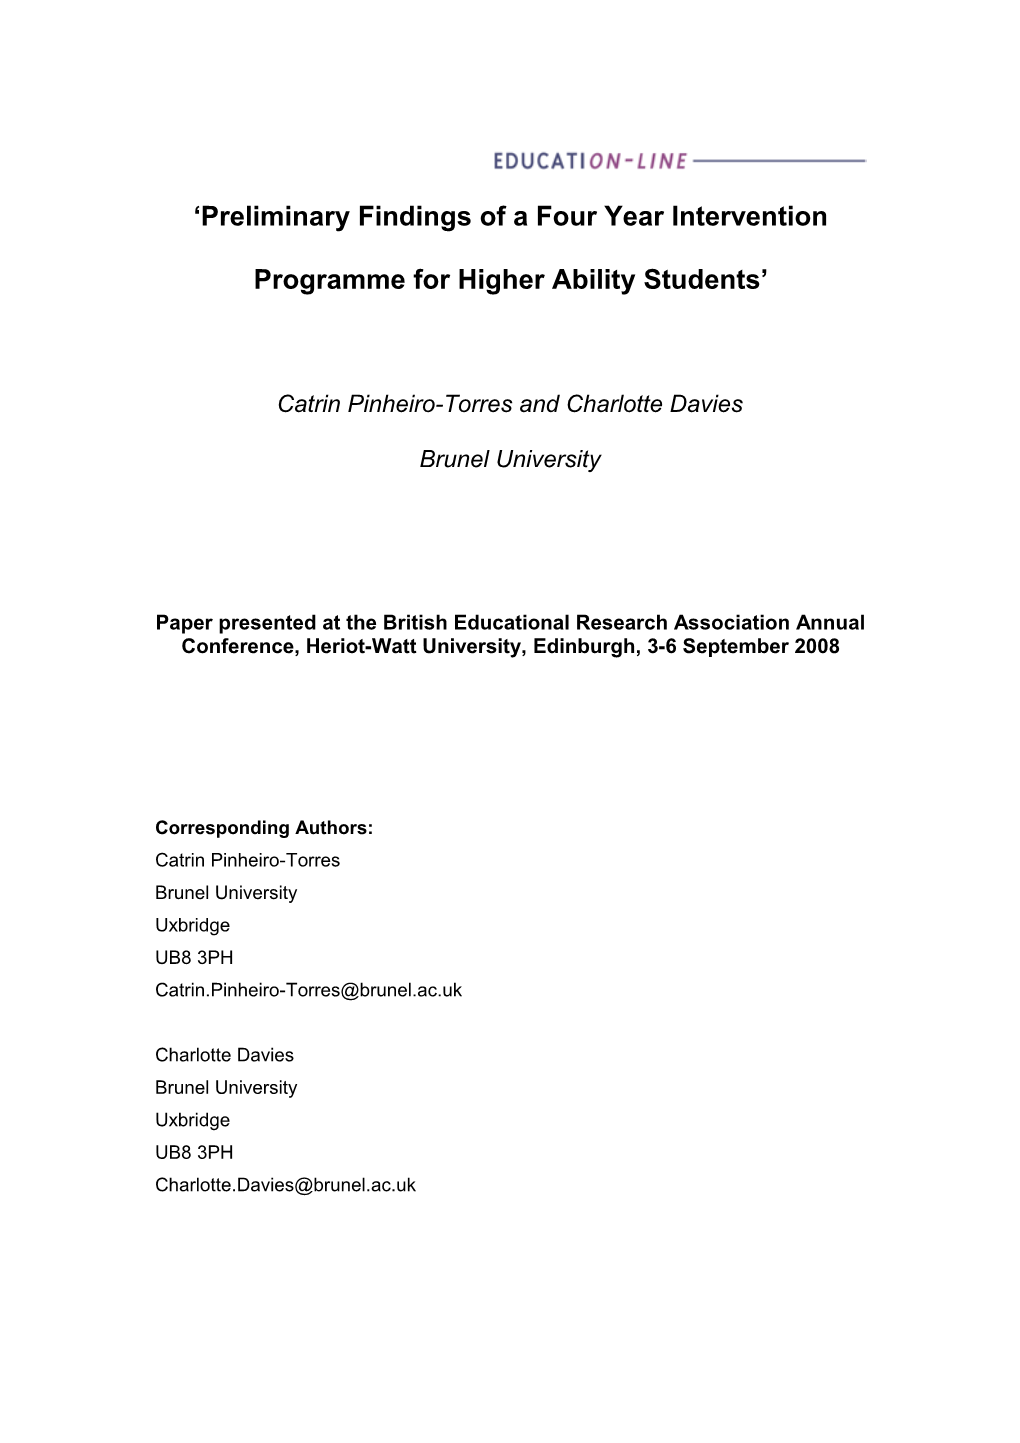 Preliminary Findings of a Four Year Intervention Programme for Highre Ability Students